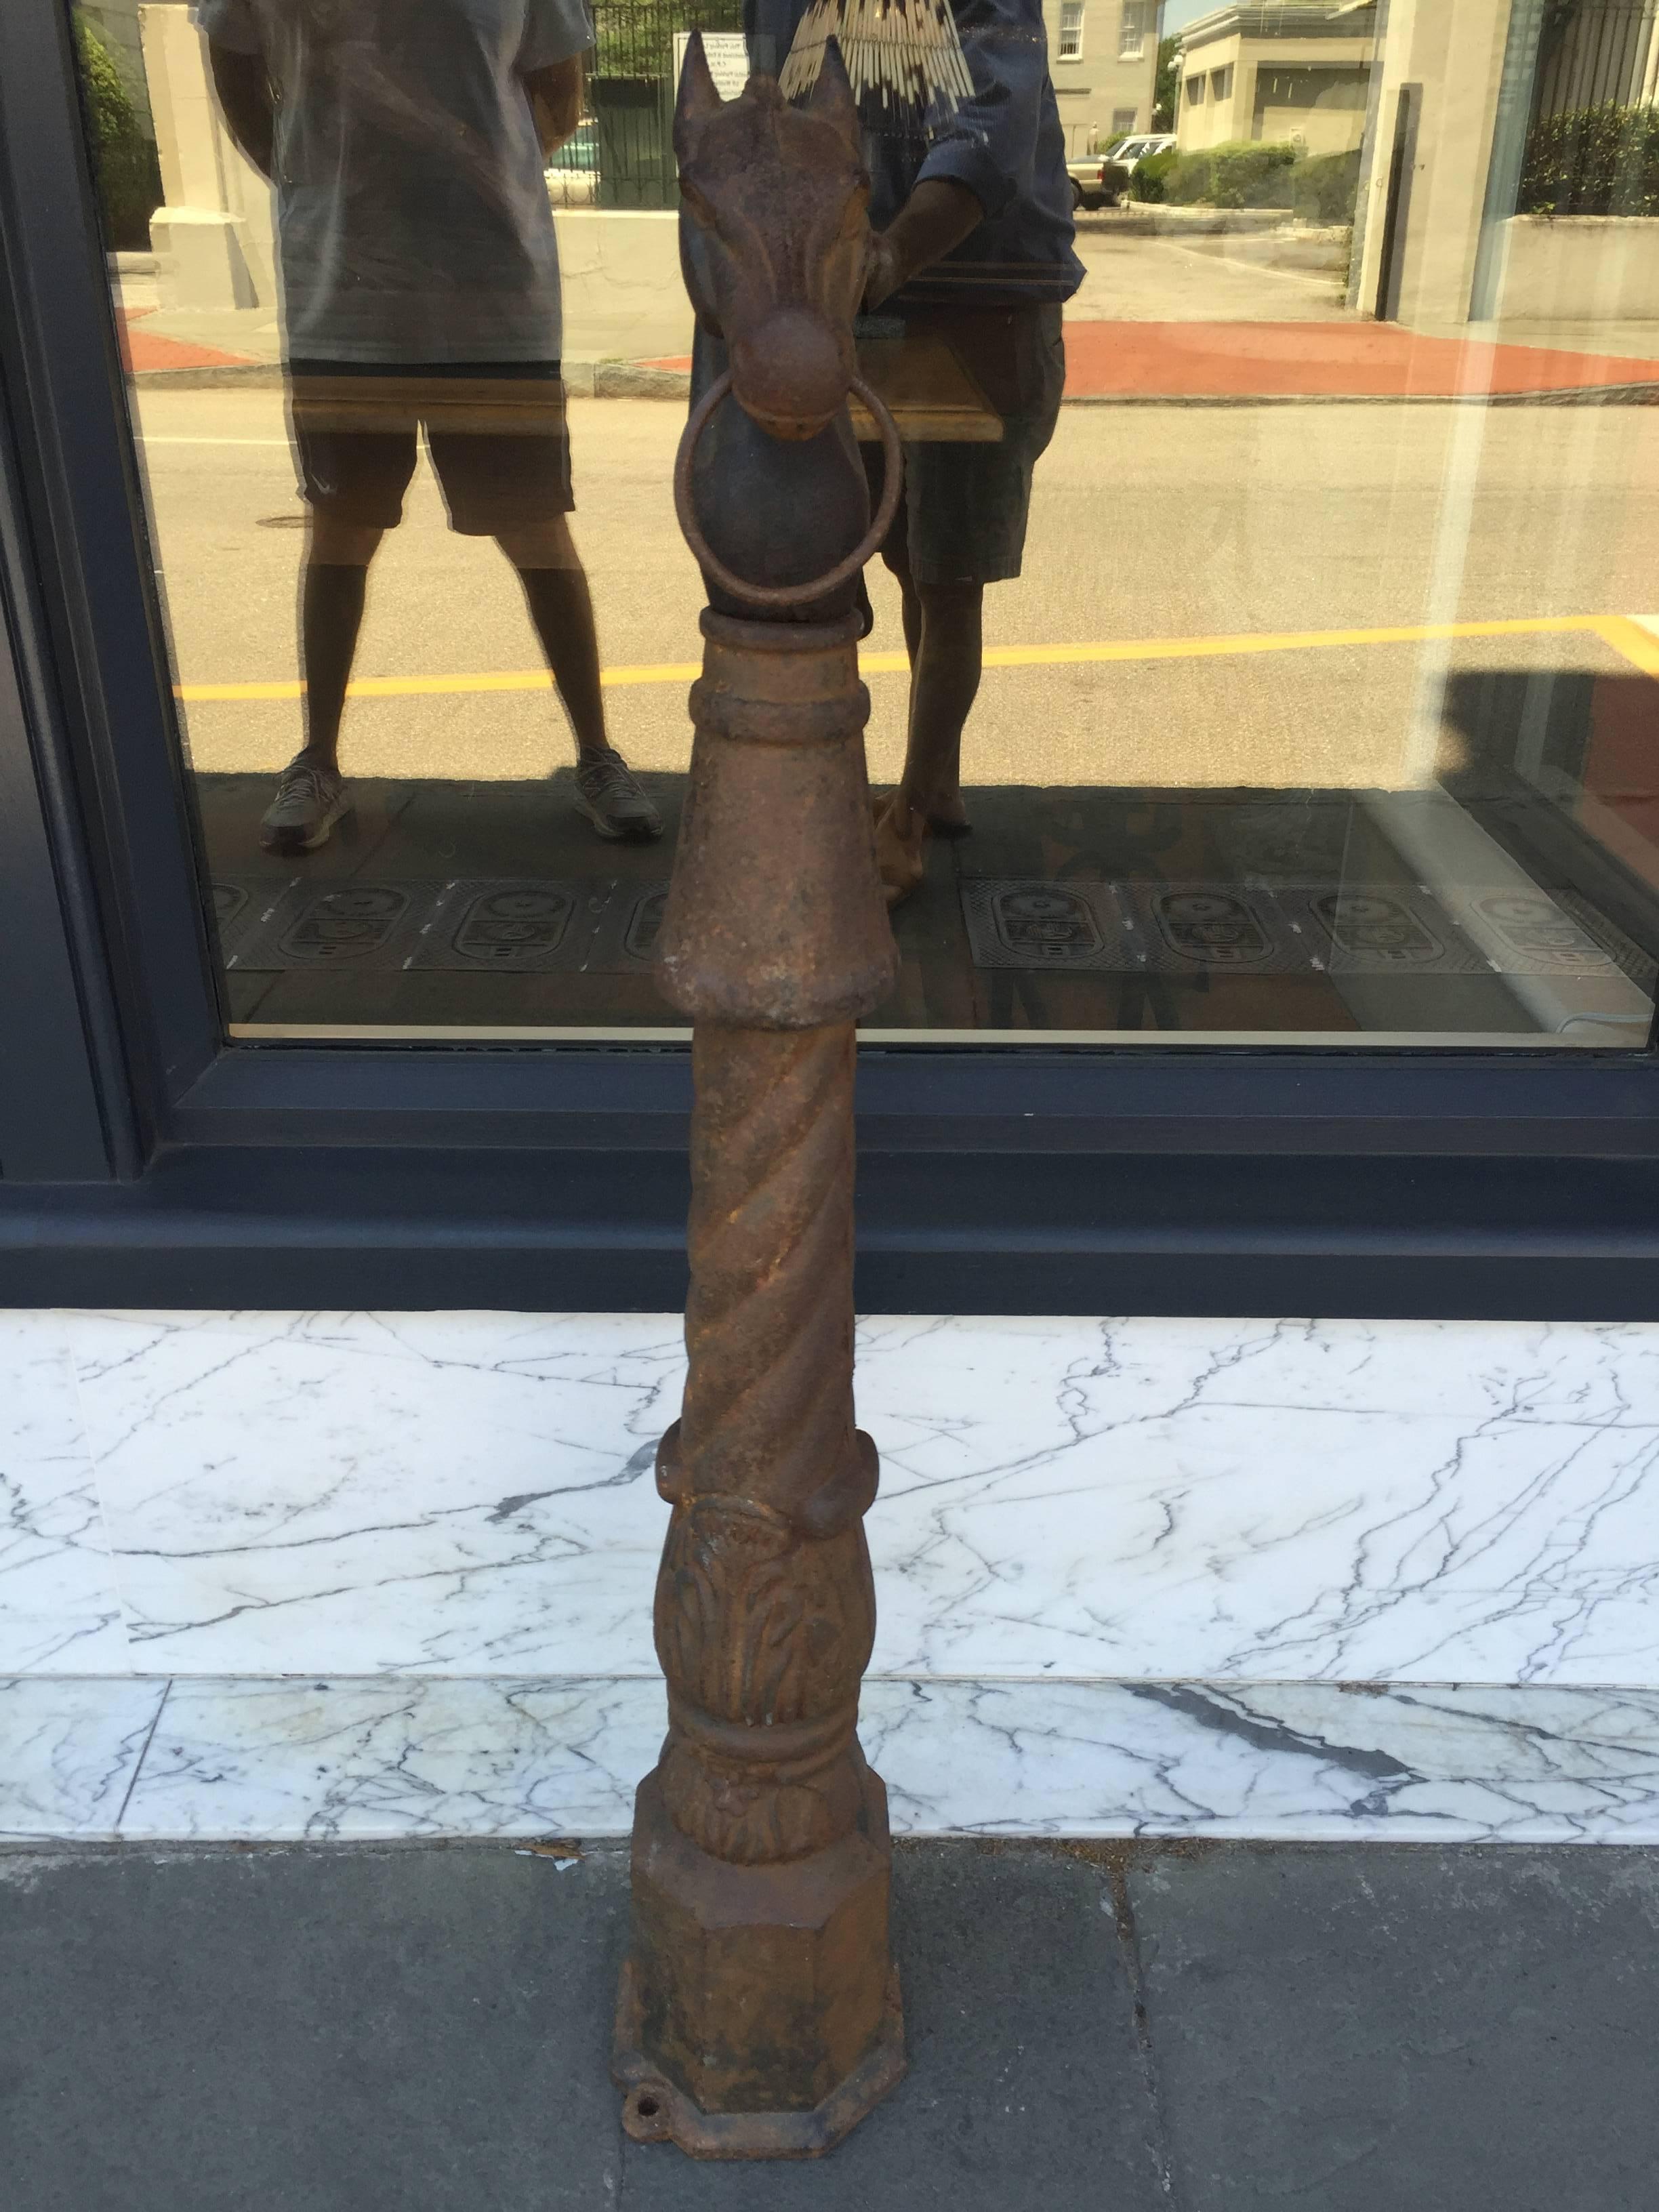 Late 19th century cast iron hitching post.